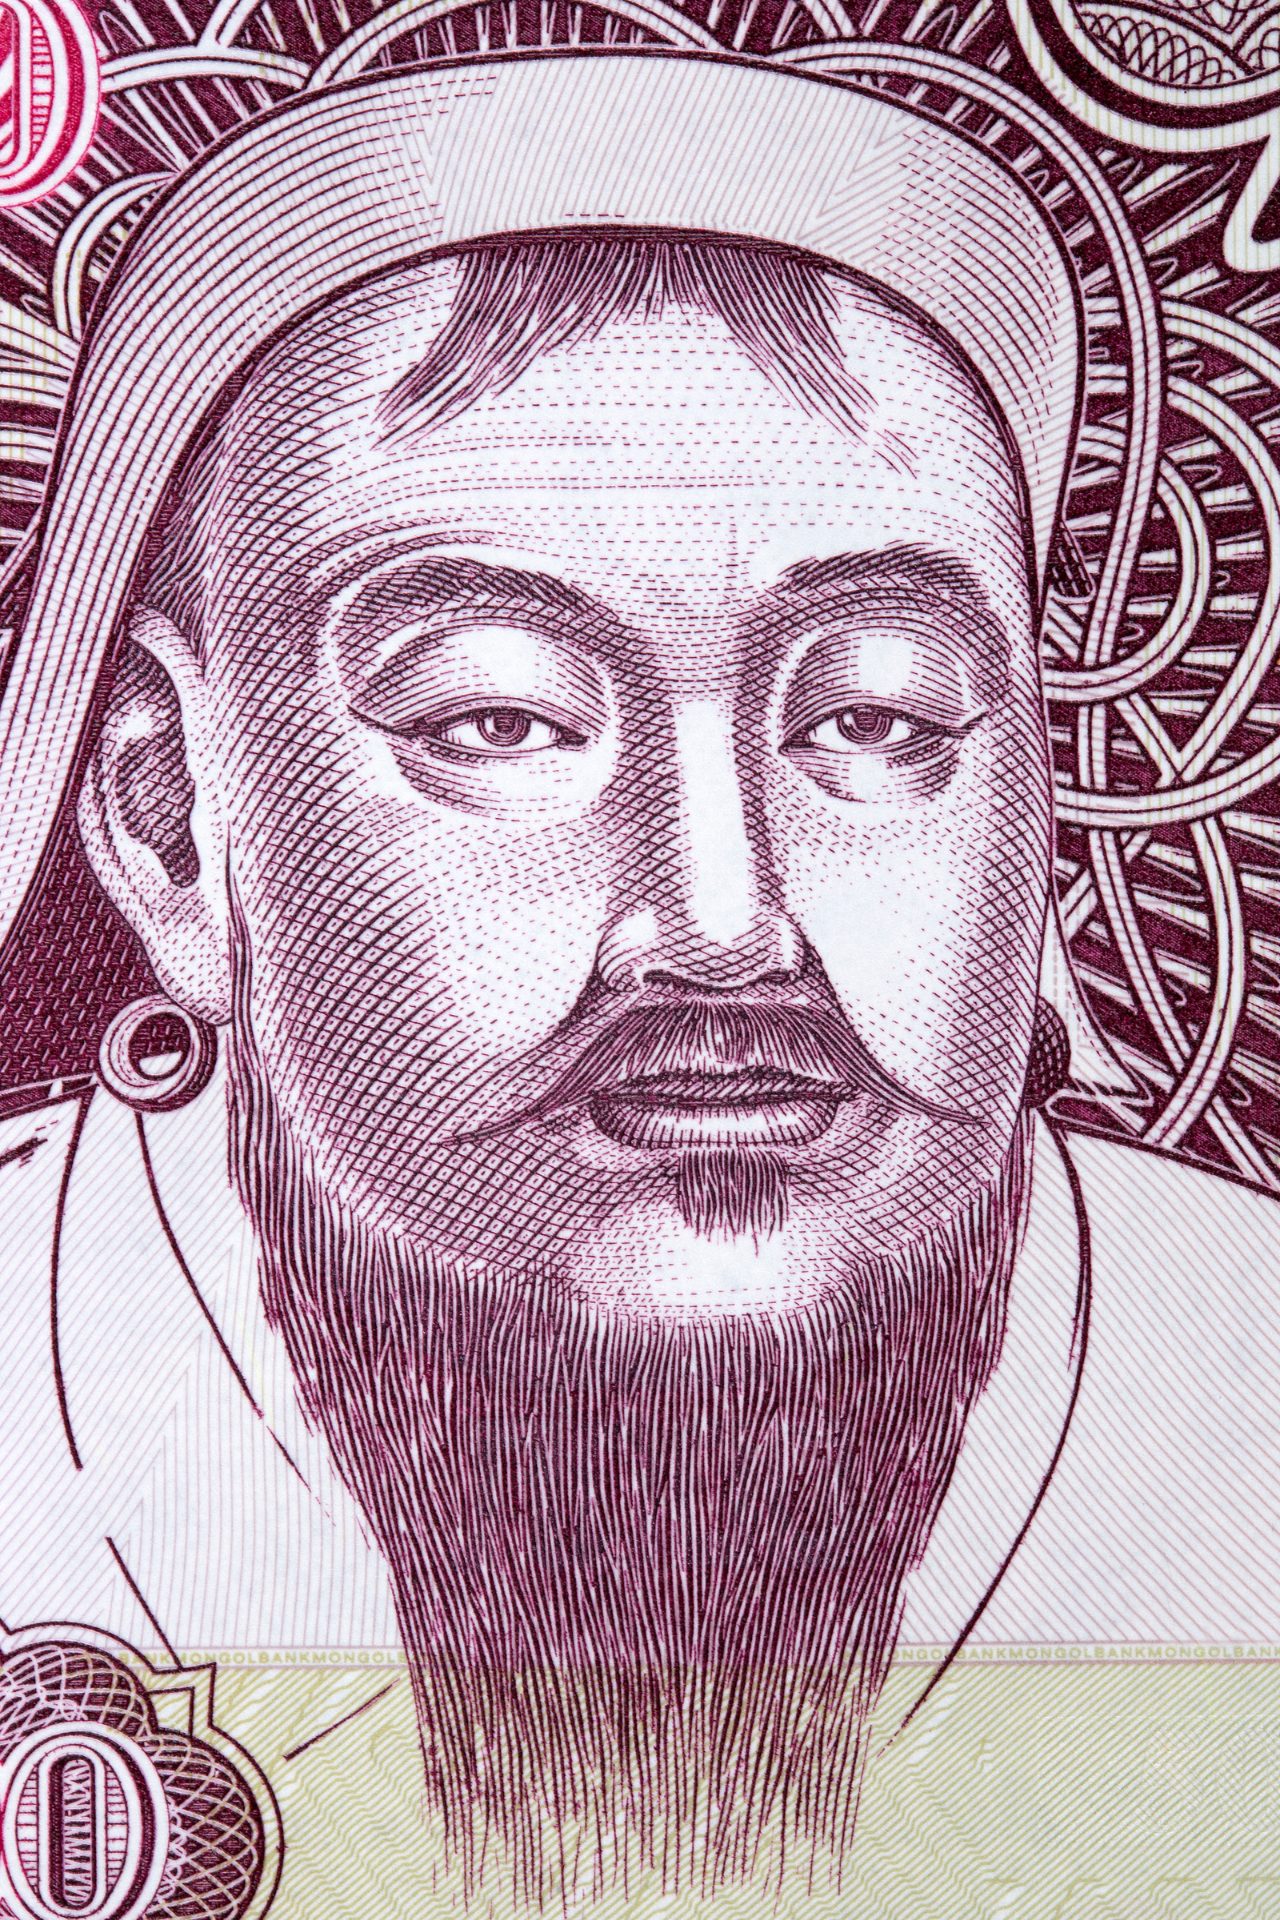 A sketch of Genghis Khan as it appears on Mongolian bank notes. He is portrayed with a long beard a broad face. He is wearing a traditional hat.